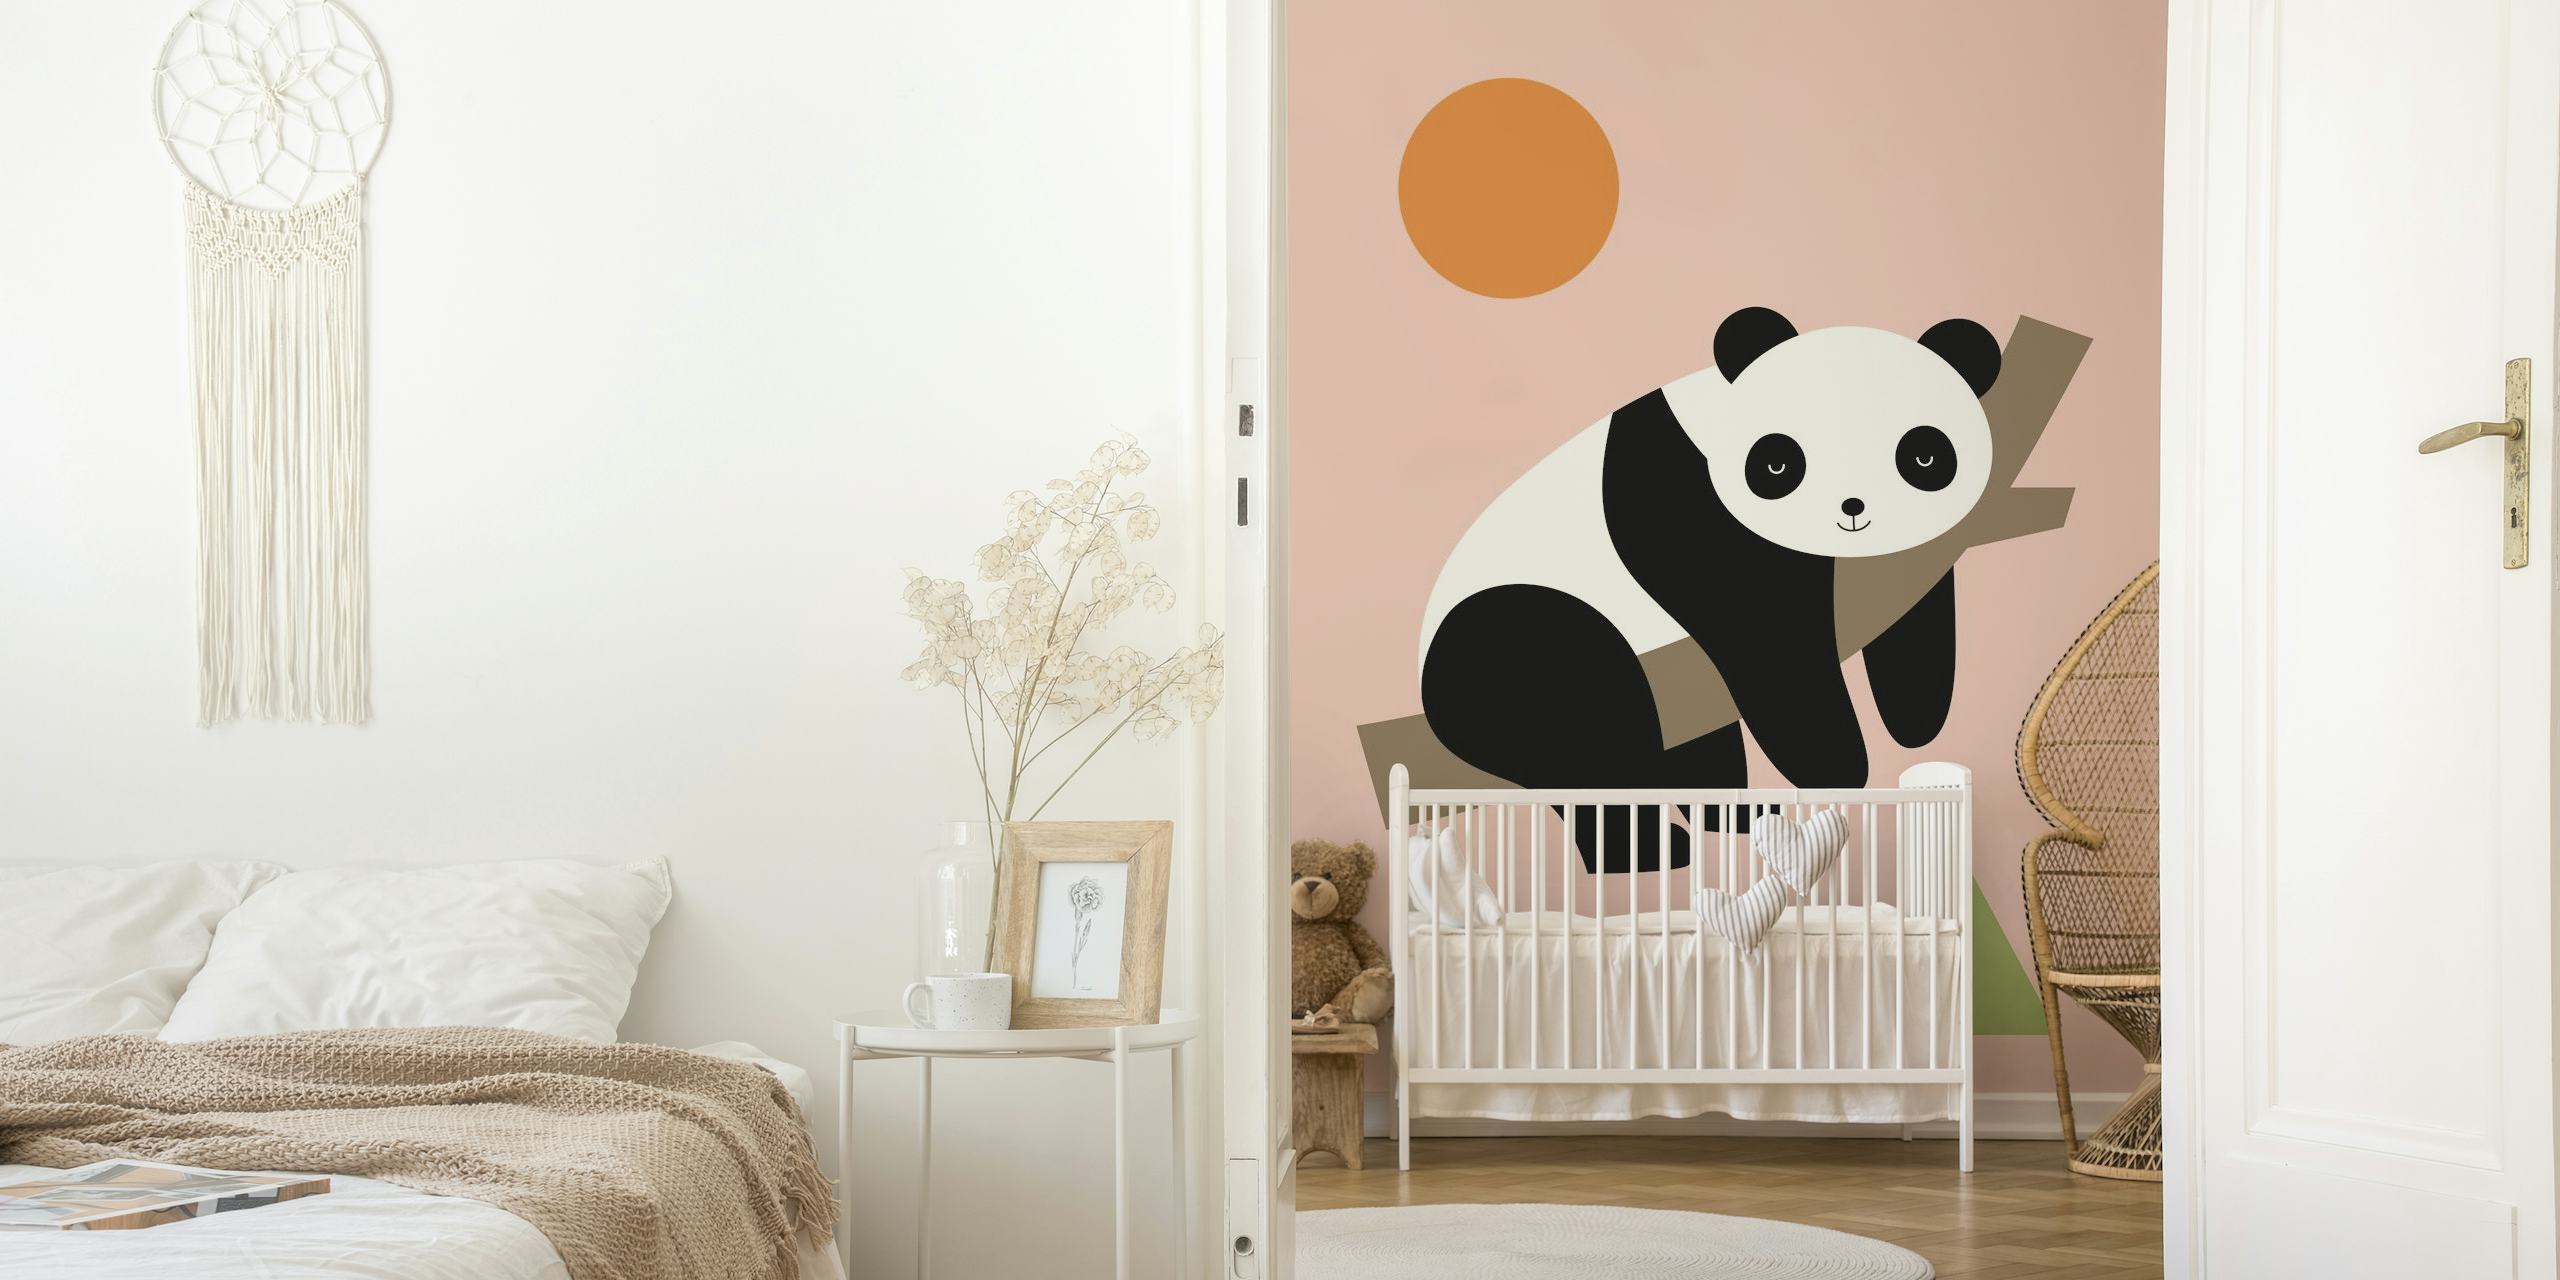 Illustration of a panda on a branch with a pink background, sun, and geometric shapes